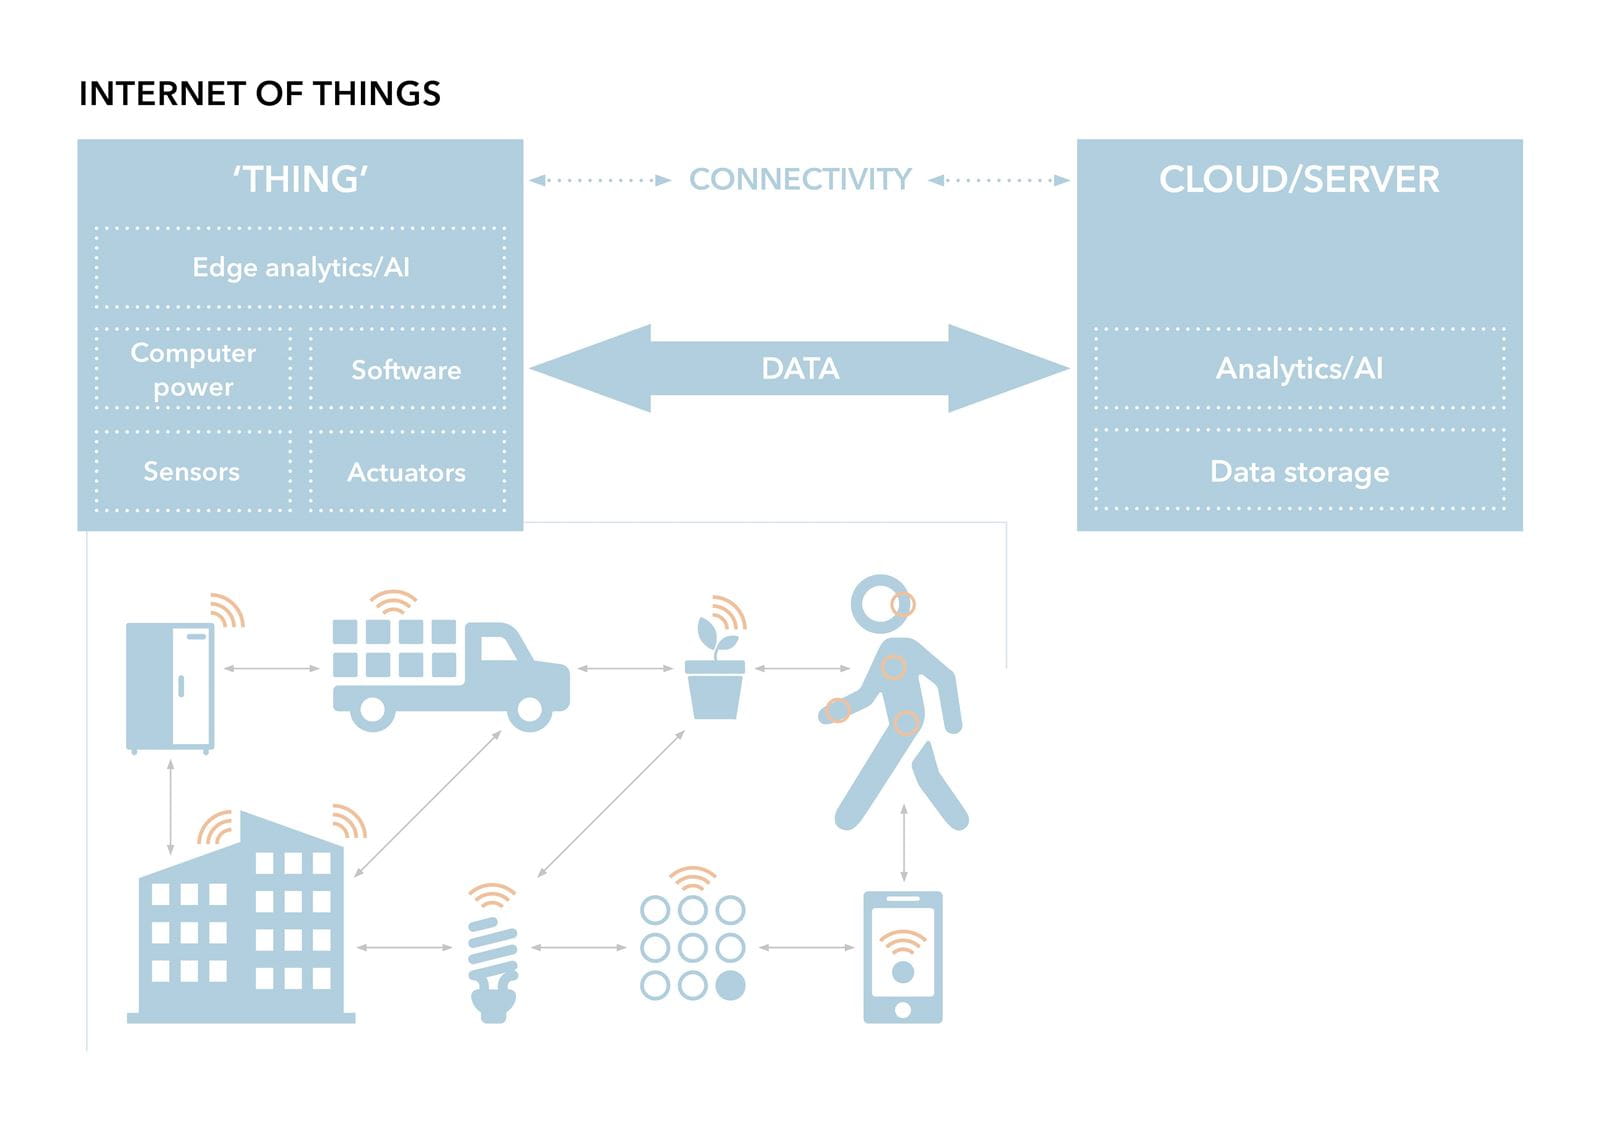 Diagram illustrating the Internet of Things